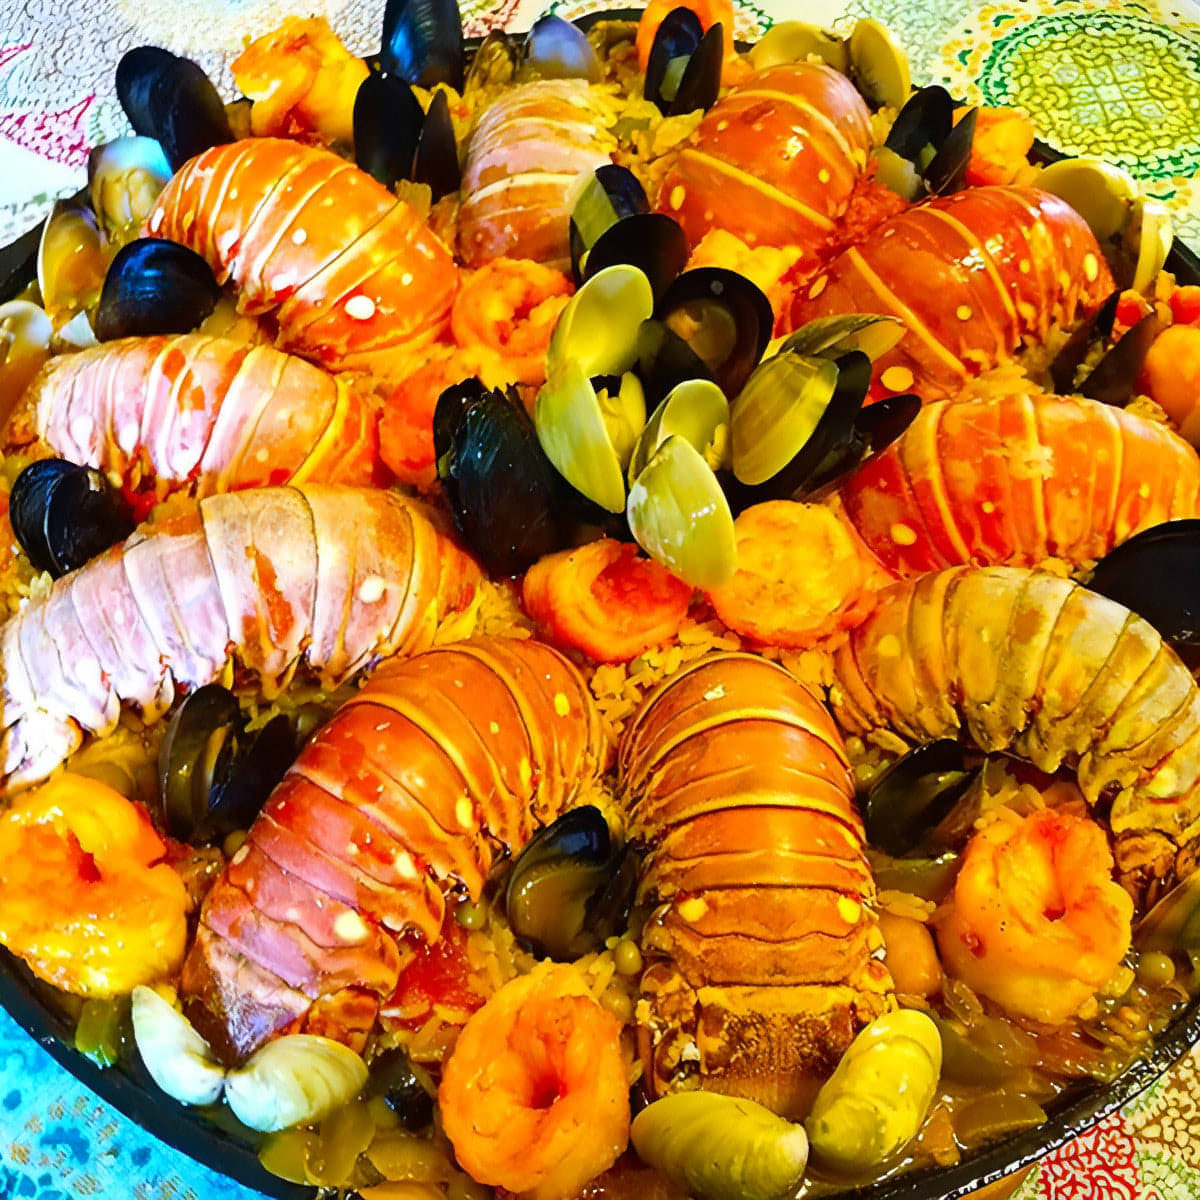 Special Paella - Key West Lobster Tails - Mussels - Clams - Shrimp and Champignon - Tapas & Paellas